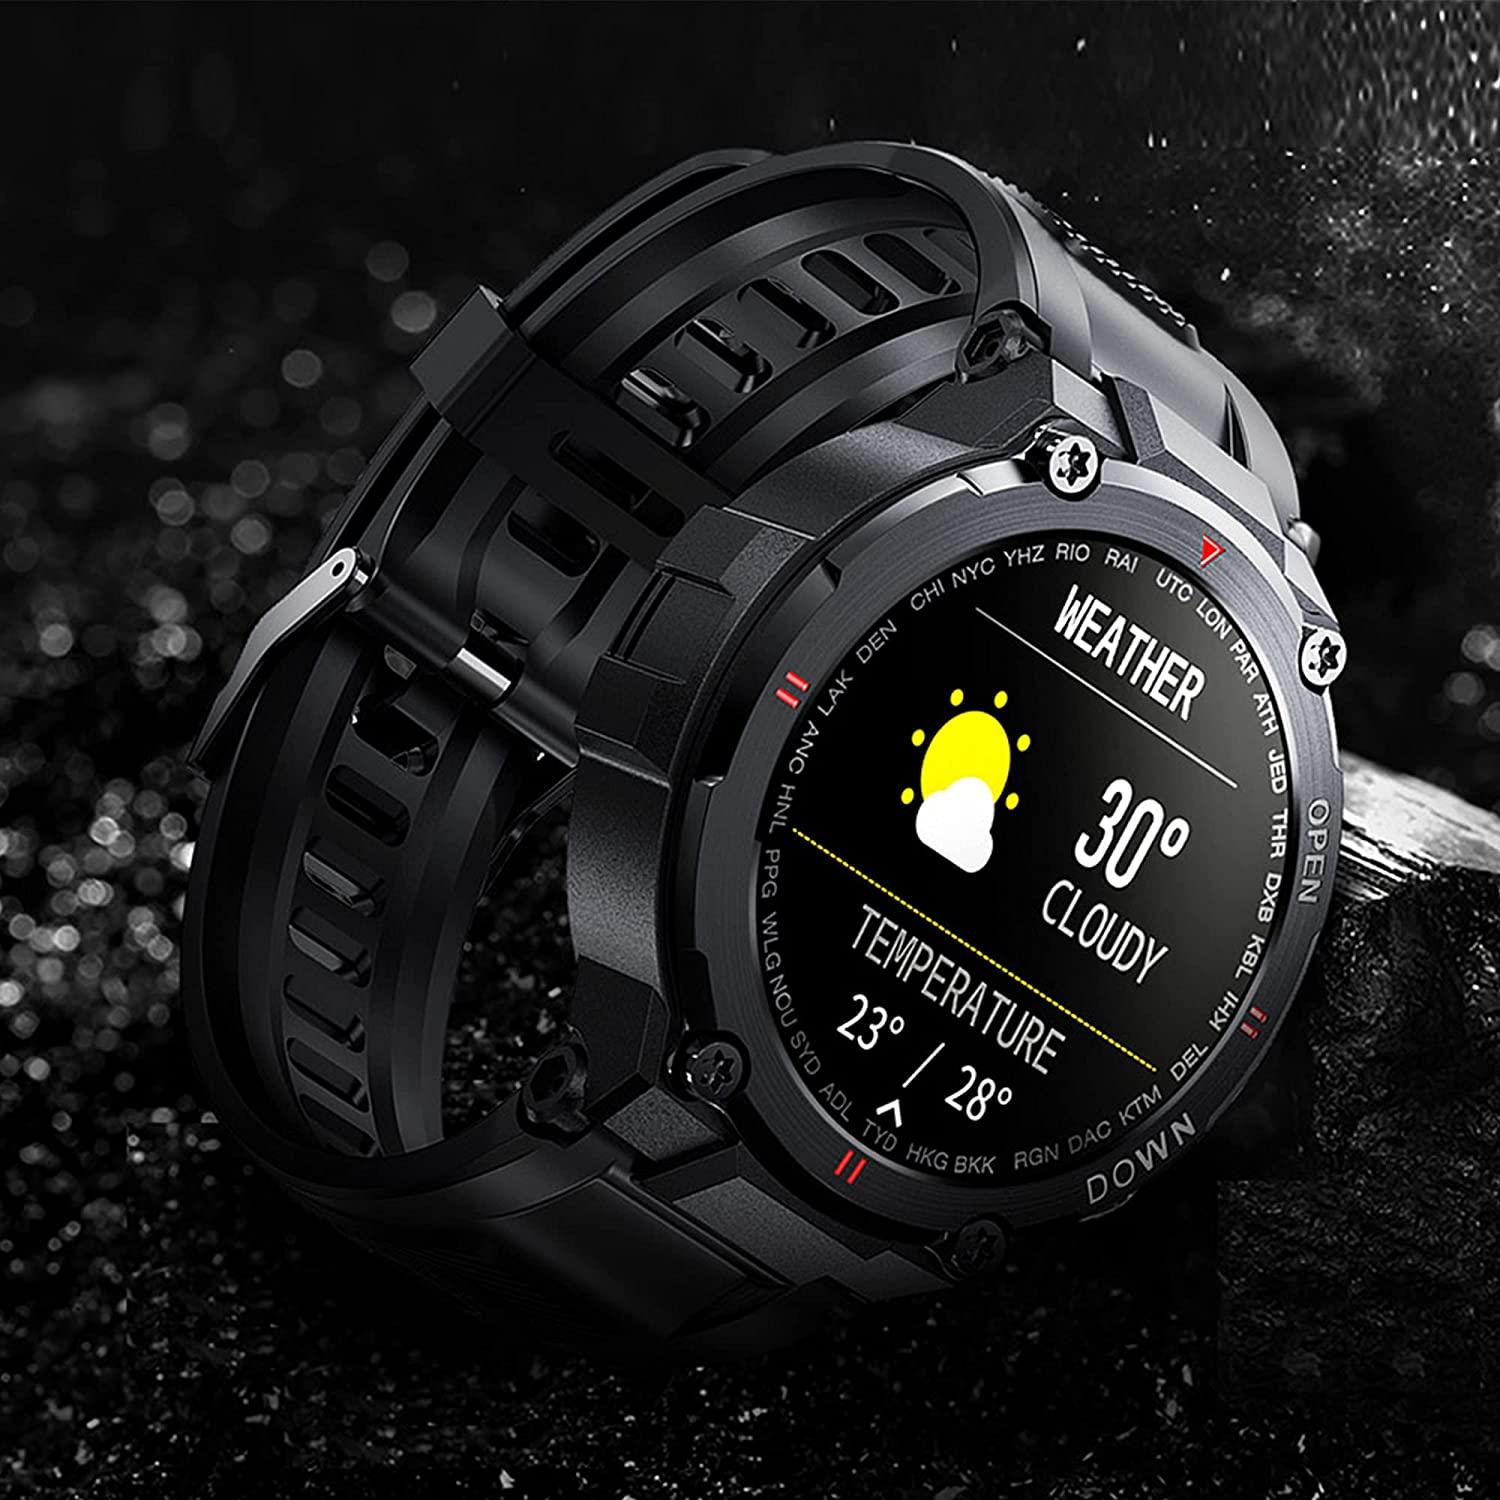 Amazfit T Rex Pro Sports Watch Android & iPhone